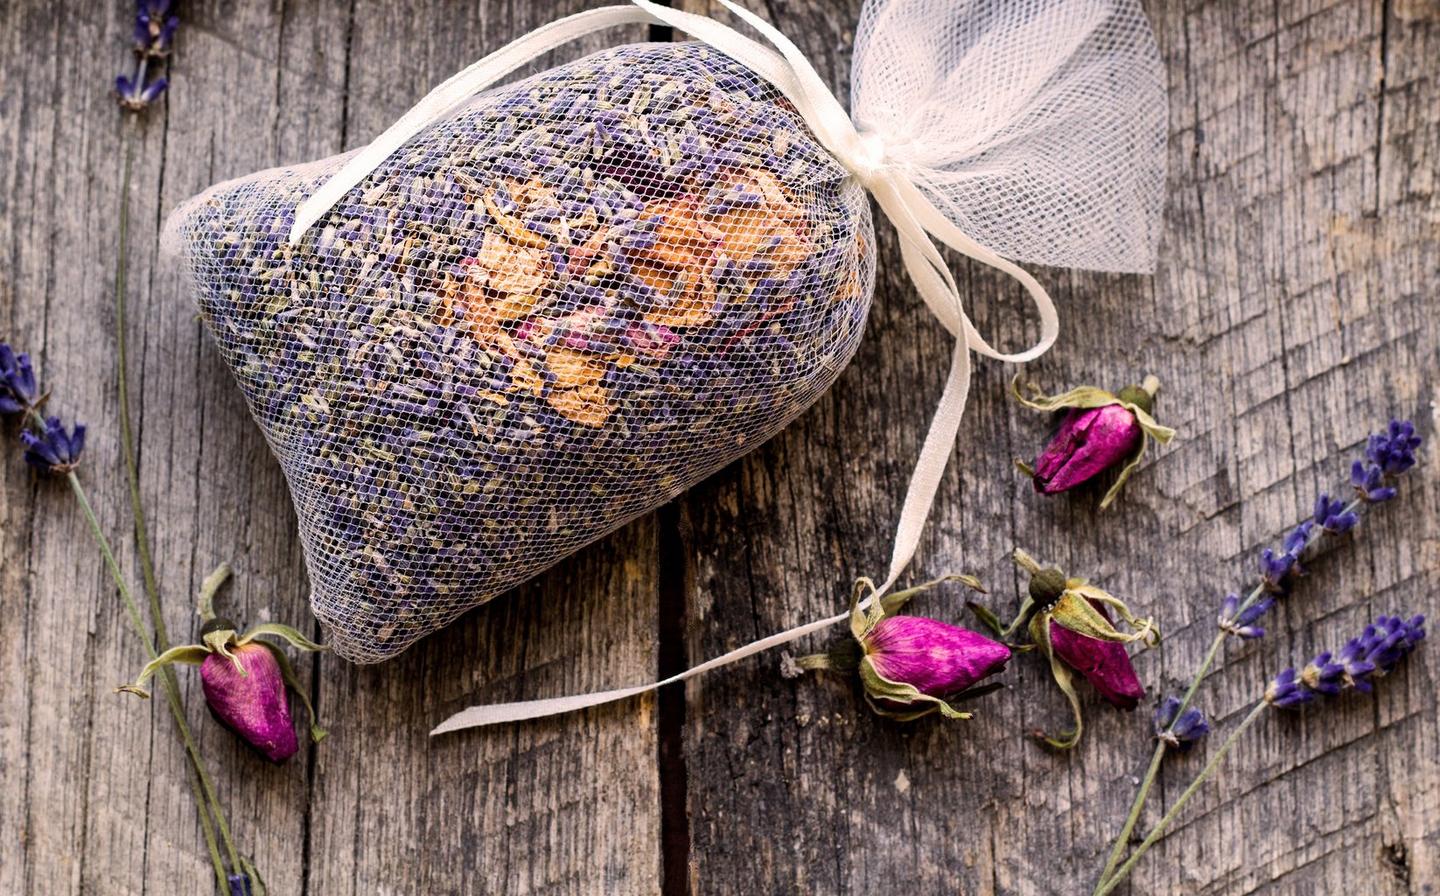 Beautifully wrapped lavender bags, which are ideal for keeping moths away from knitwear when stored in drawers